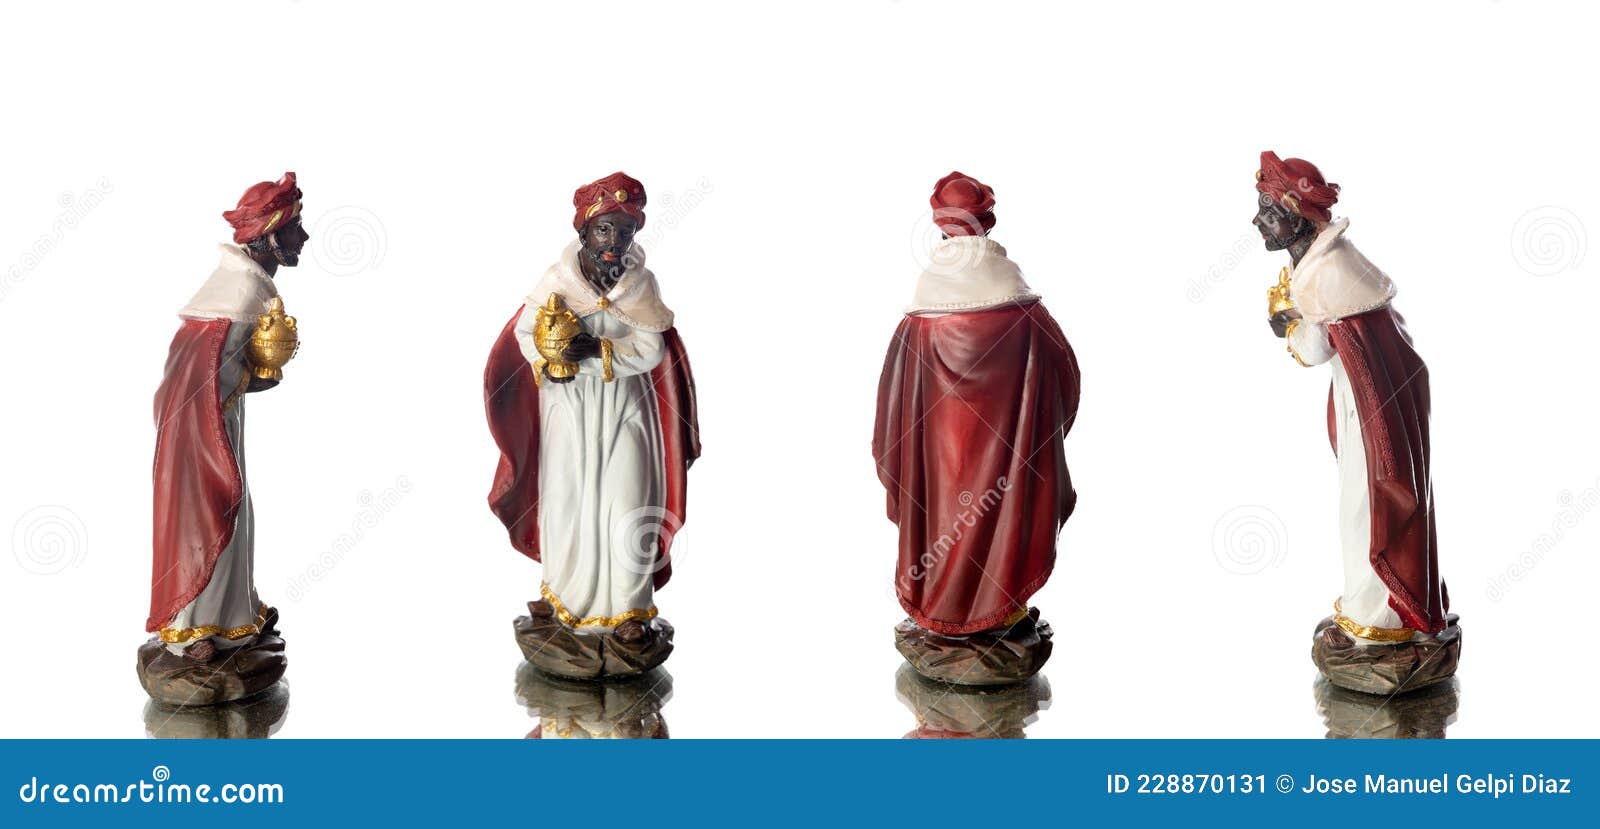 balthazar, the third of the three wise men different positions